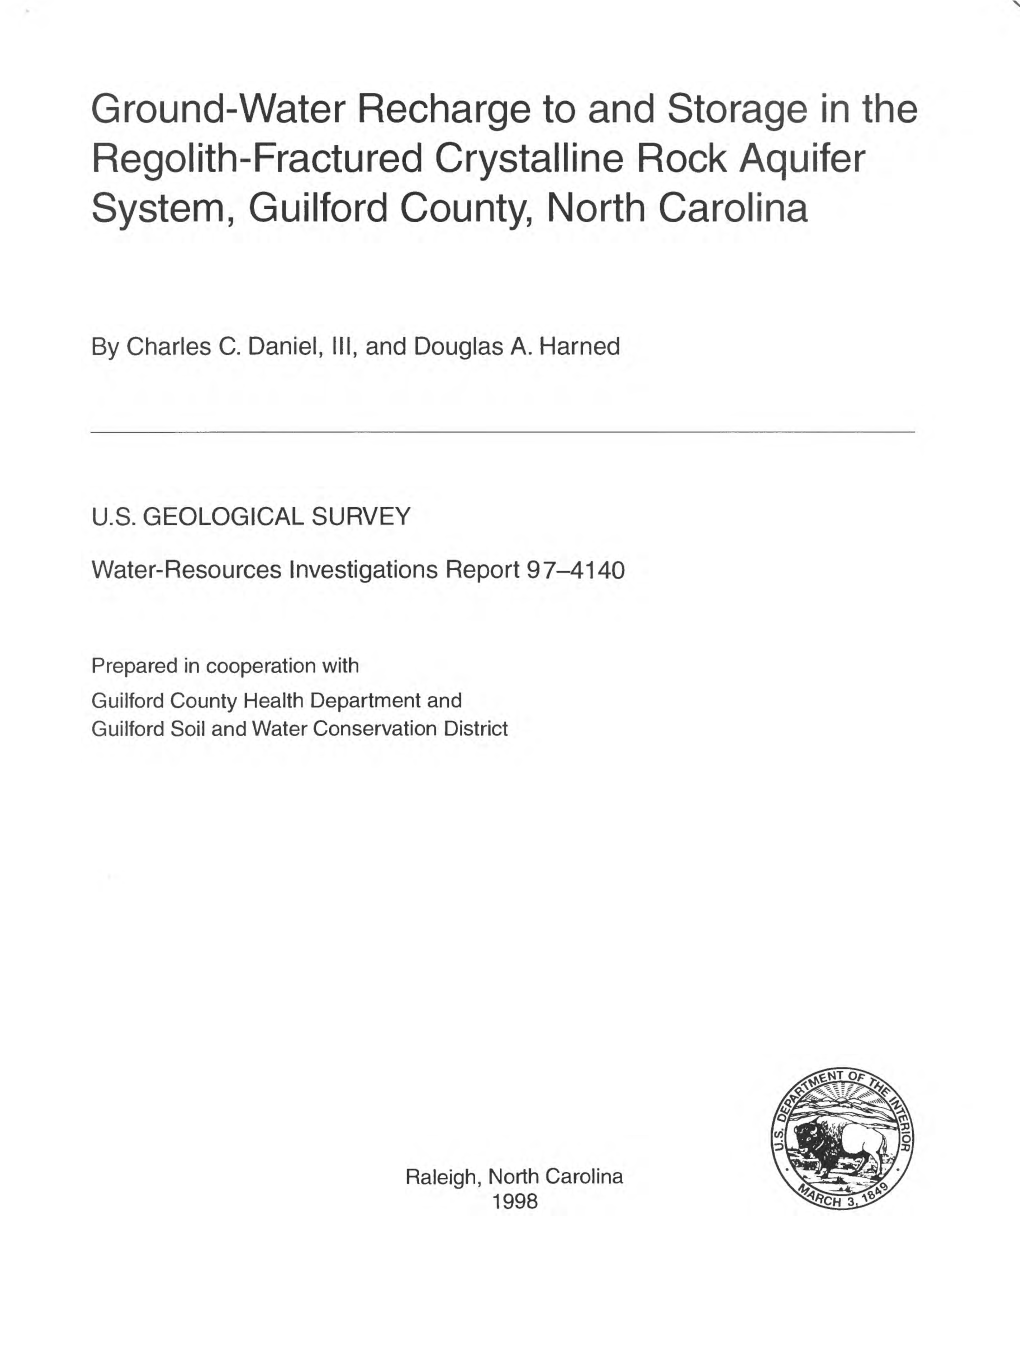 Ground-Water Recharge to and Storage in the Regolith-Fractured Crystalline Rock Aquifer System, Guilford County, North Carolina